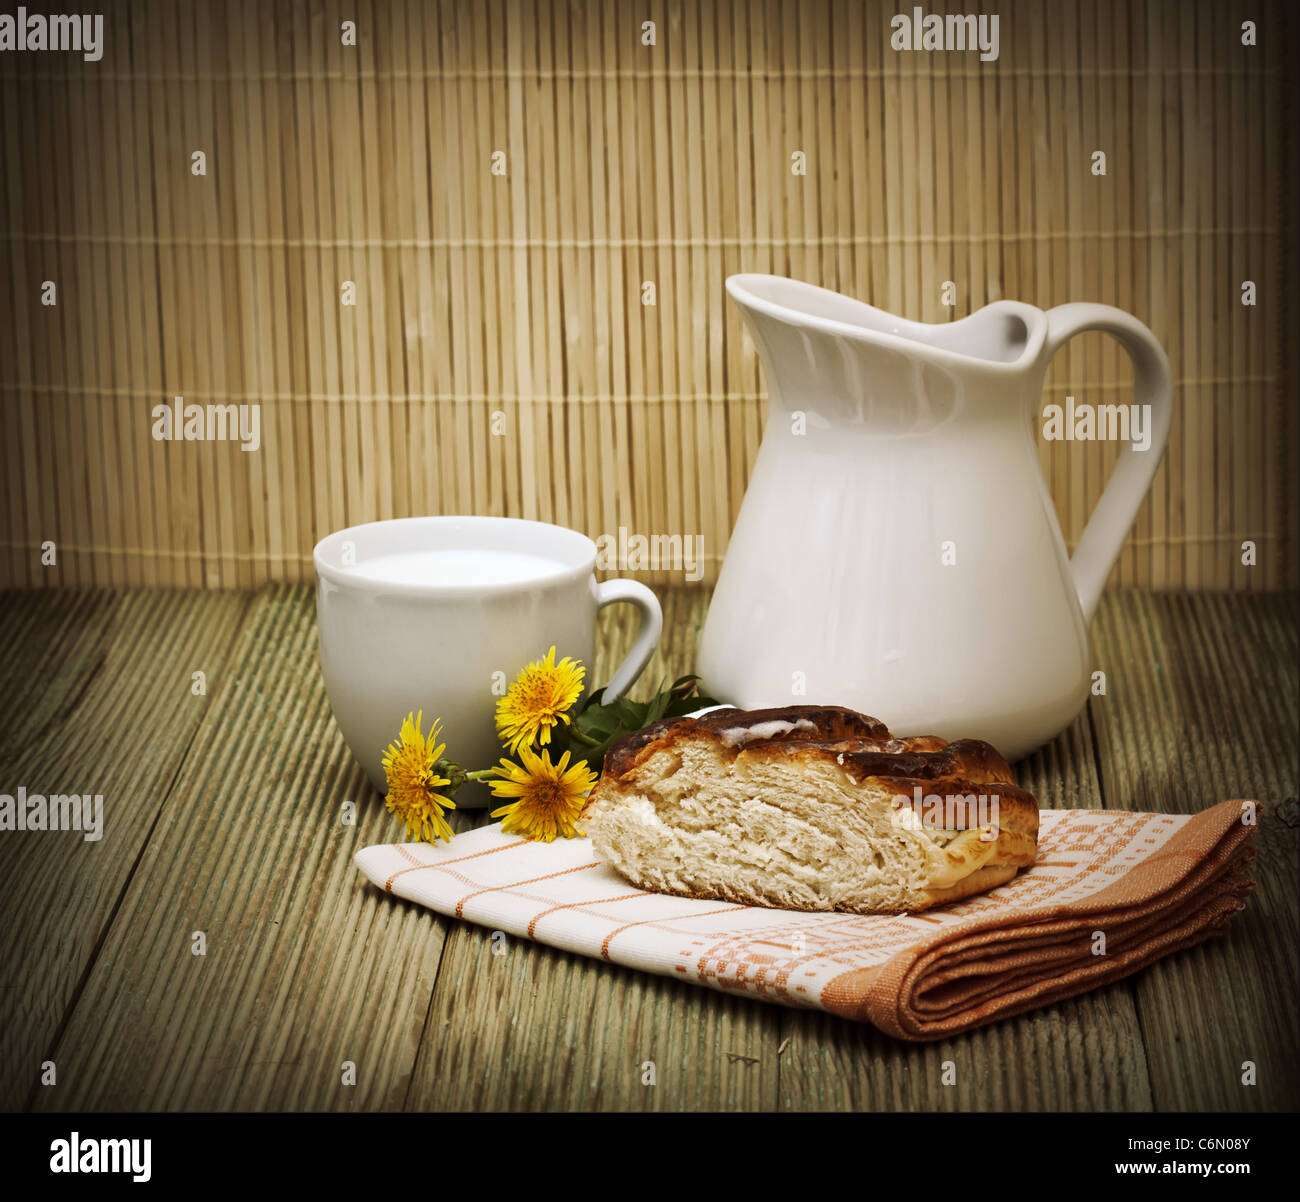 pitcher of milk and a piece of cake on a wooden table Stock Photo